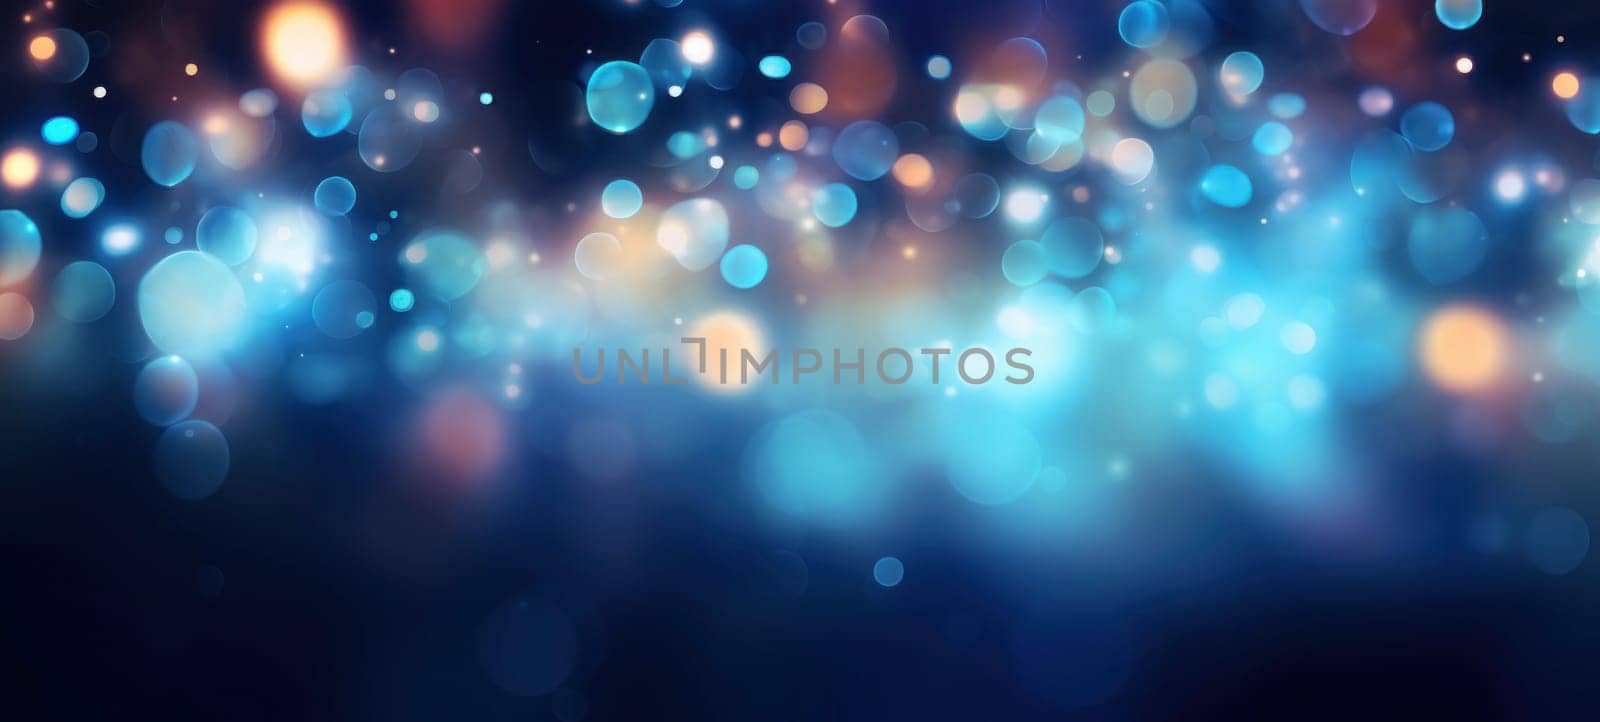 Vibrant abstract background featuring a dynamic cluster of bokeh lights in a myriad of colors.